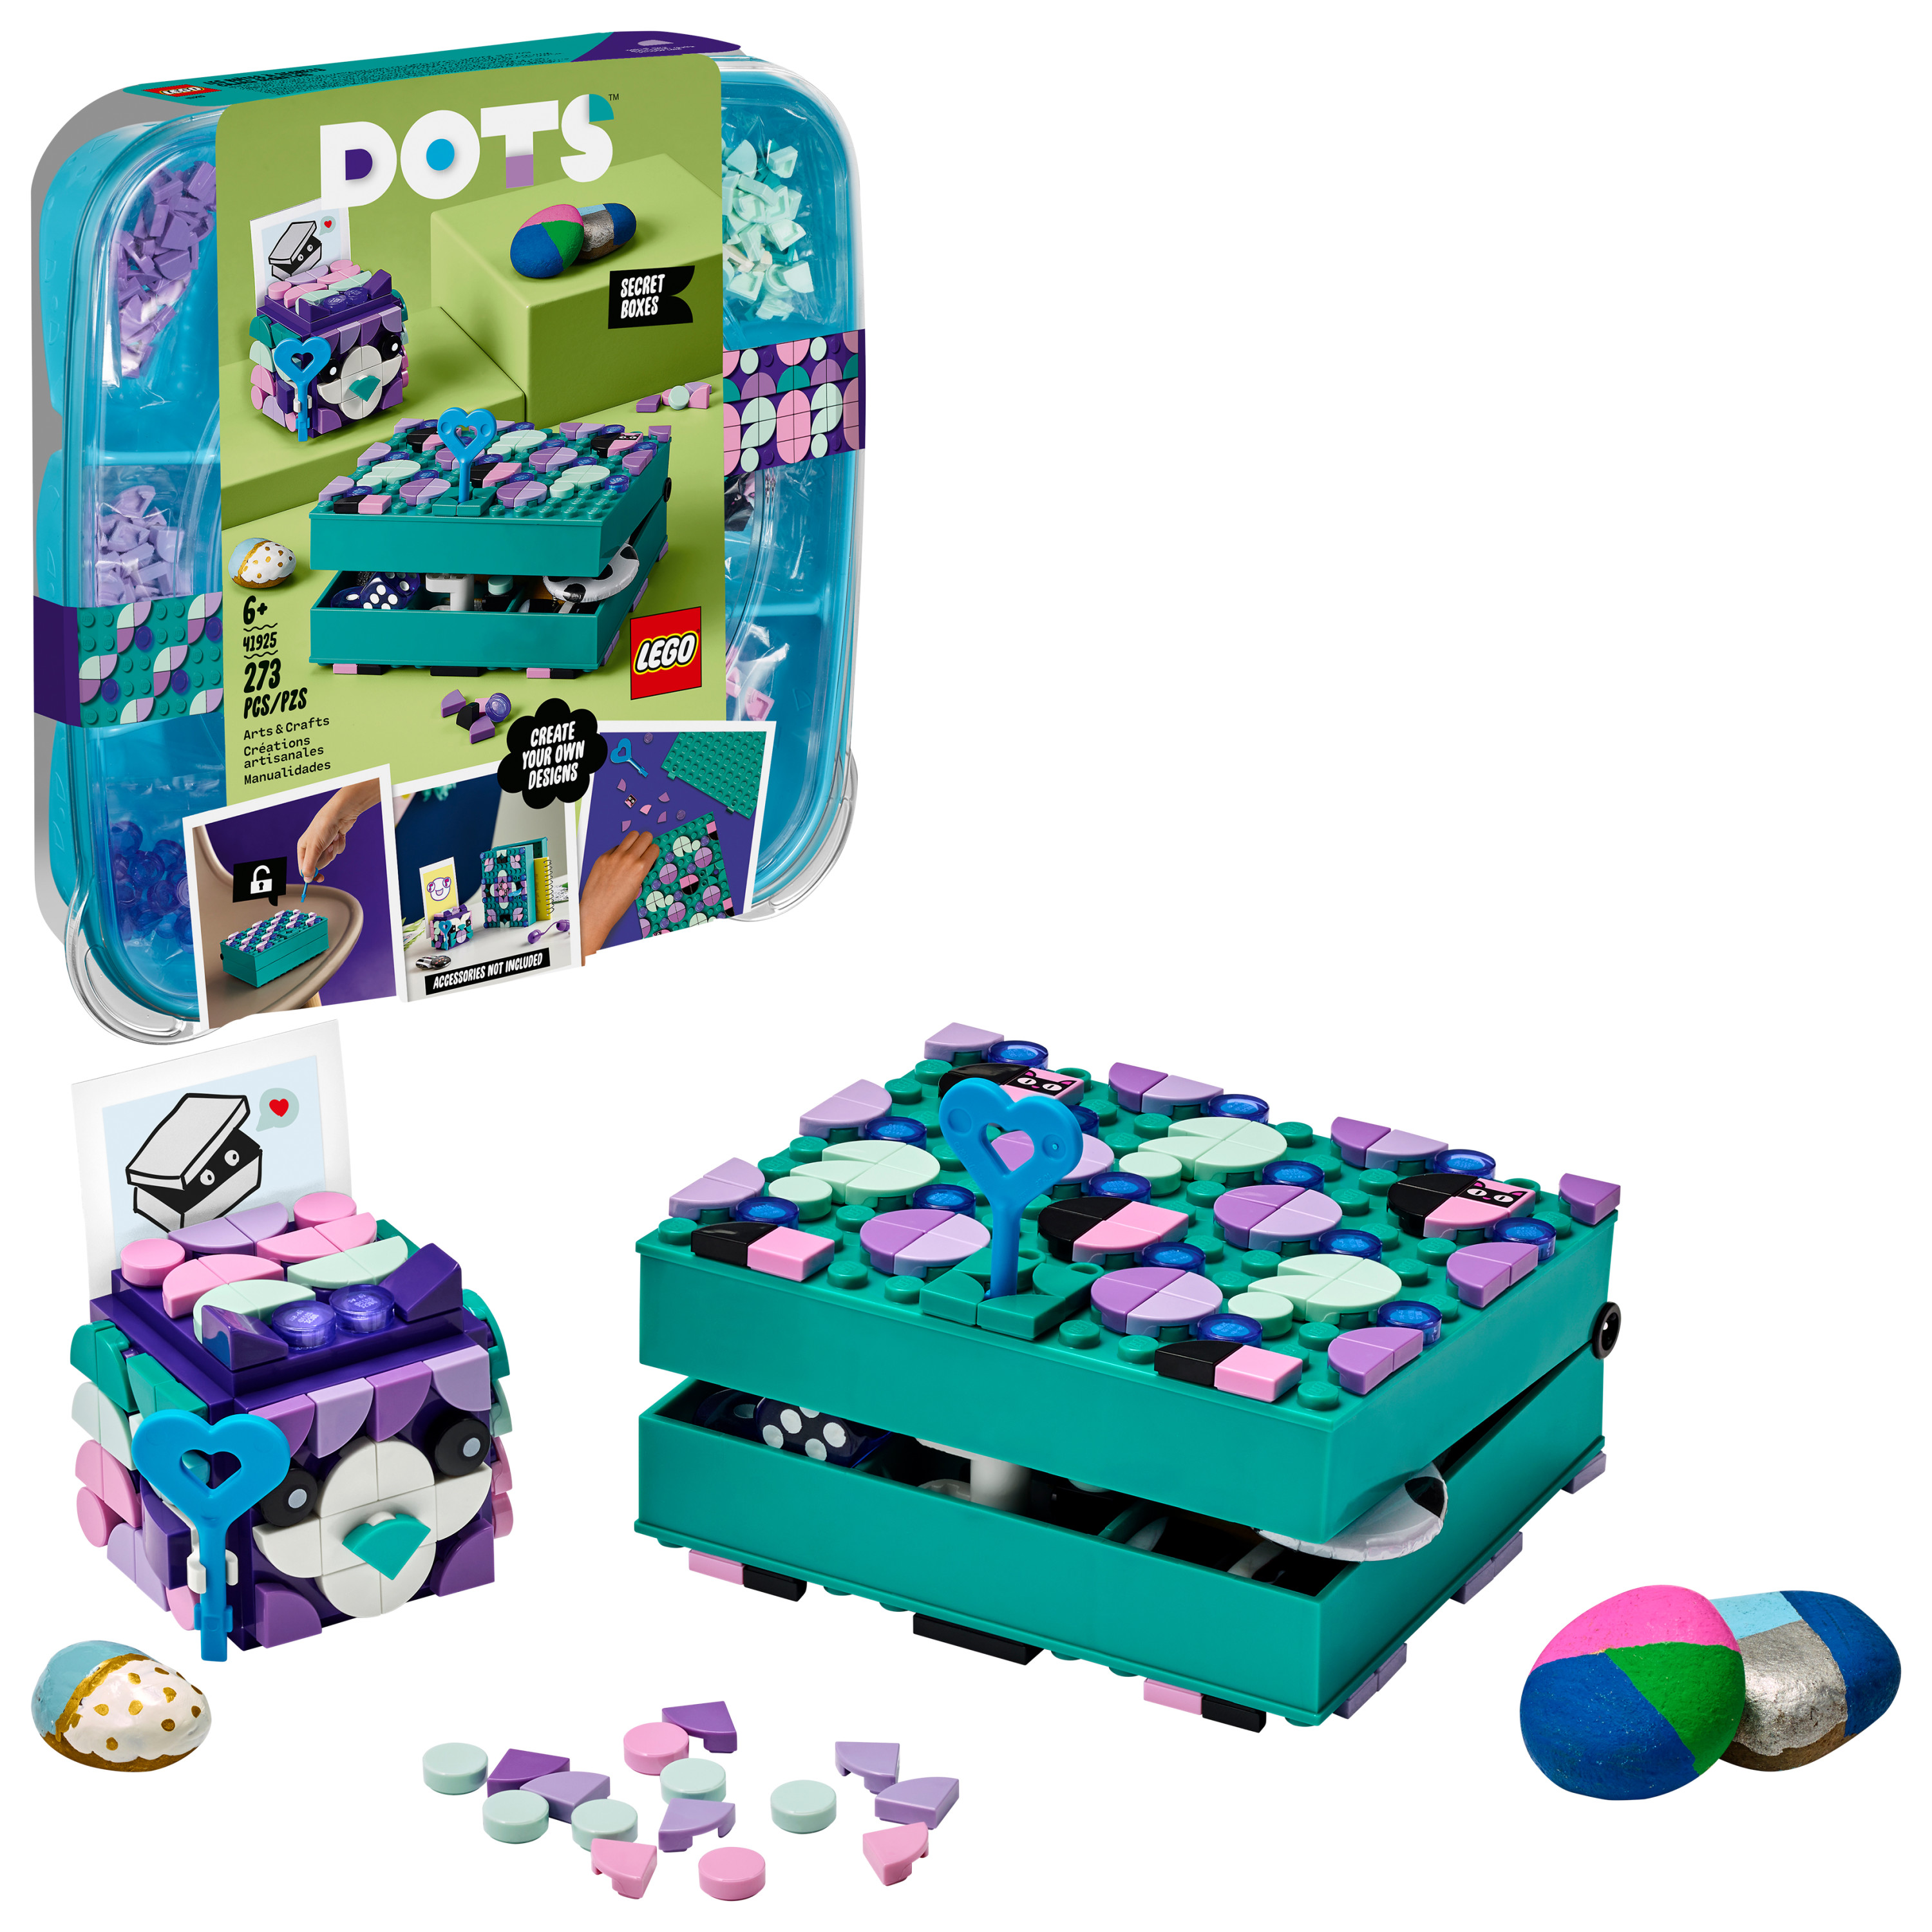 LEGO DOTS Secret Boxes 41925 DIY Craft Decorations Kit; Makes a Creative Gift for Kids (273 Pieces) - image 1 of 7